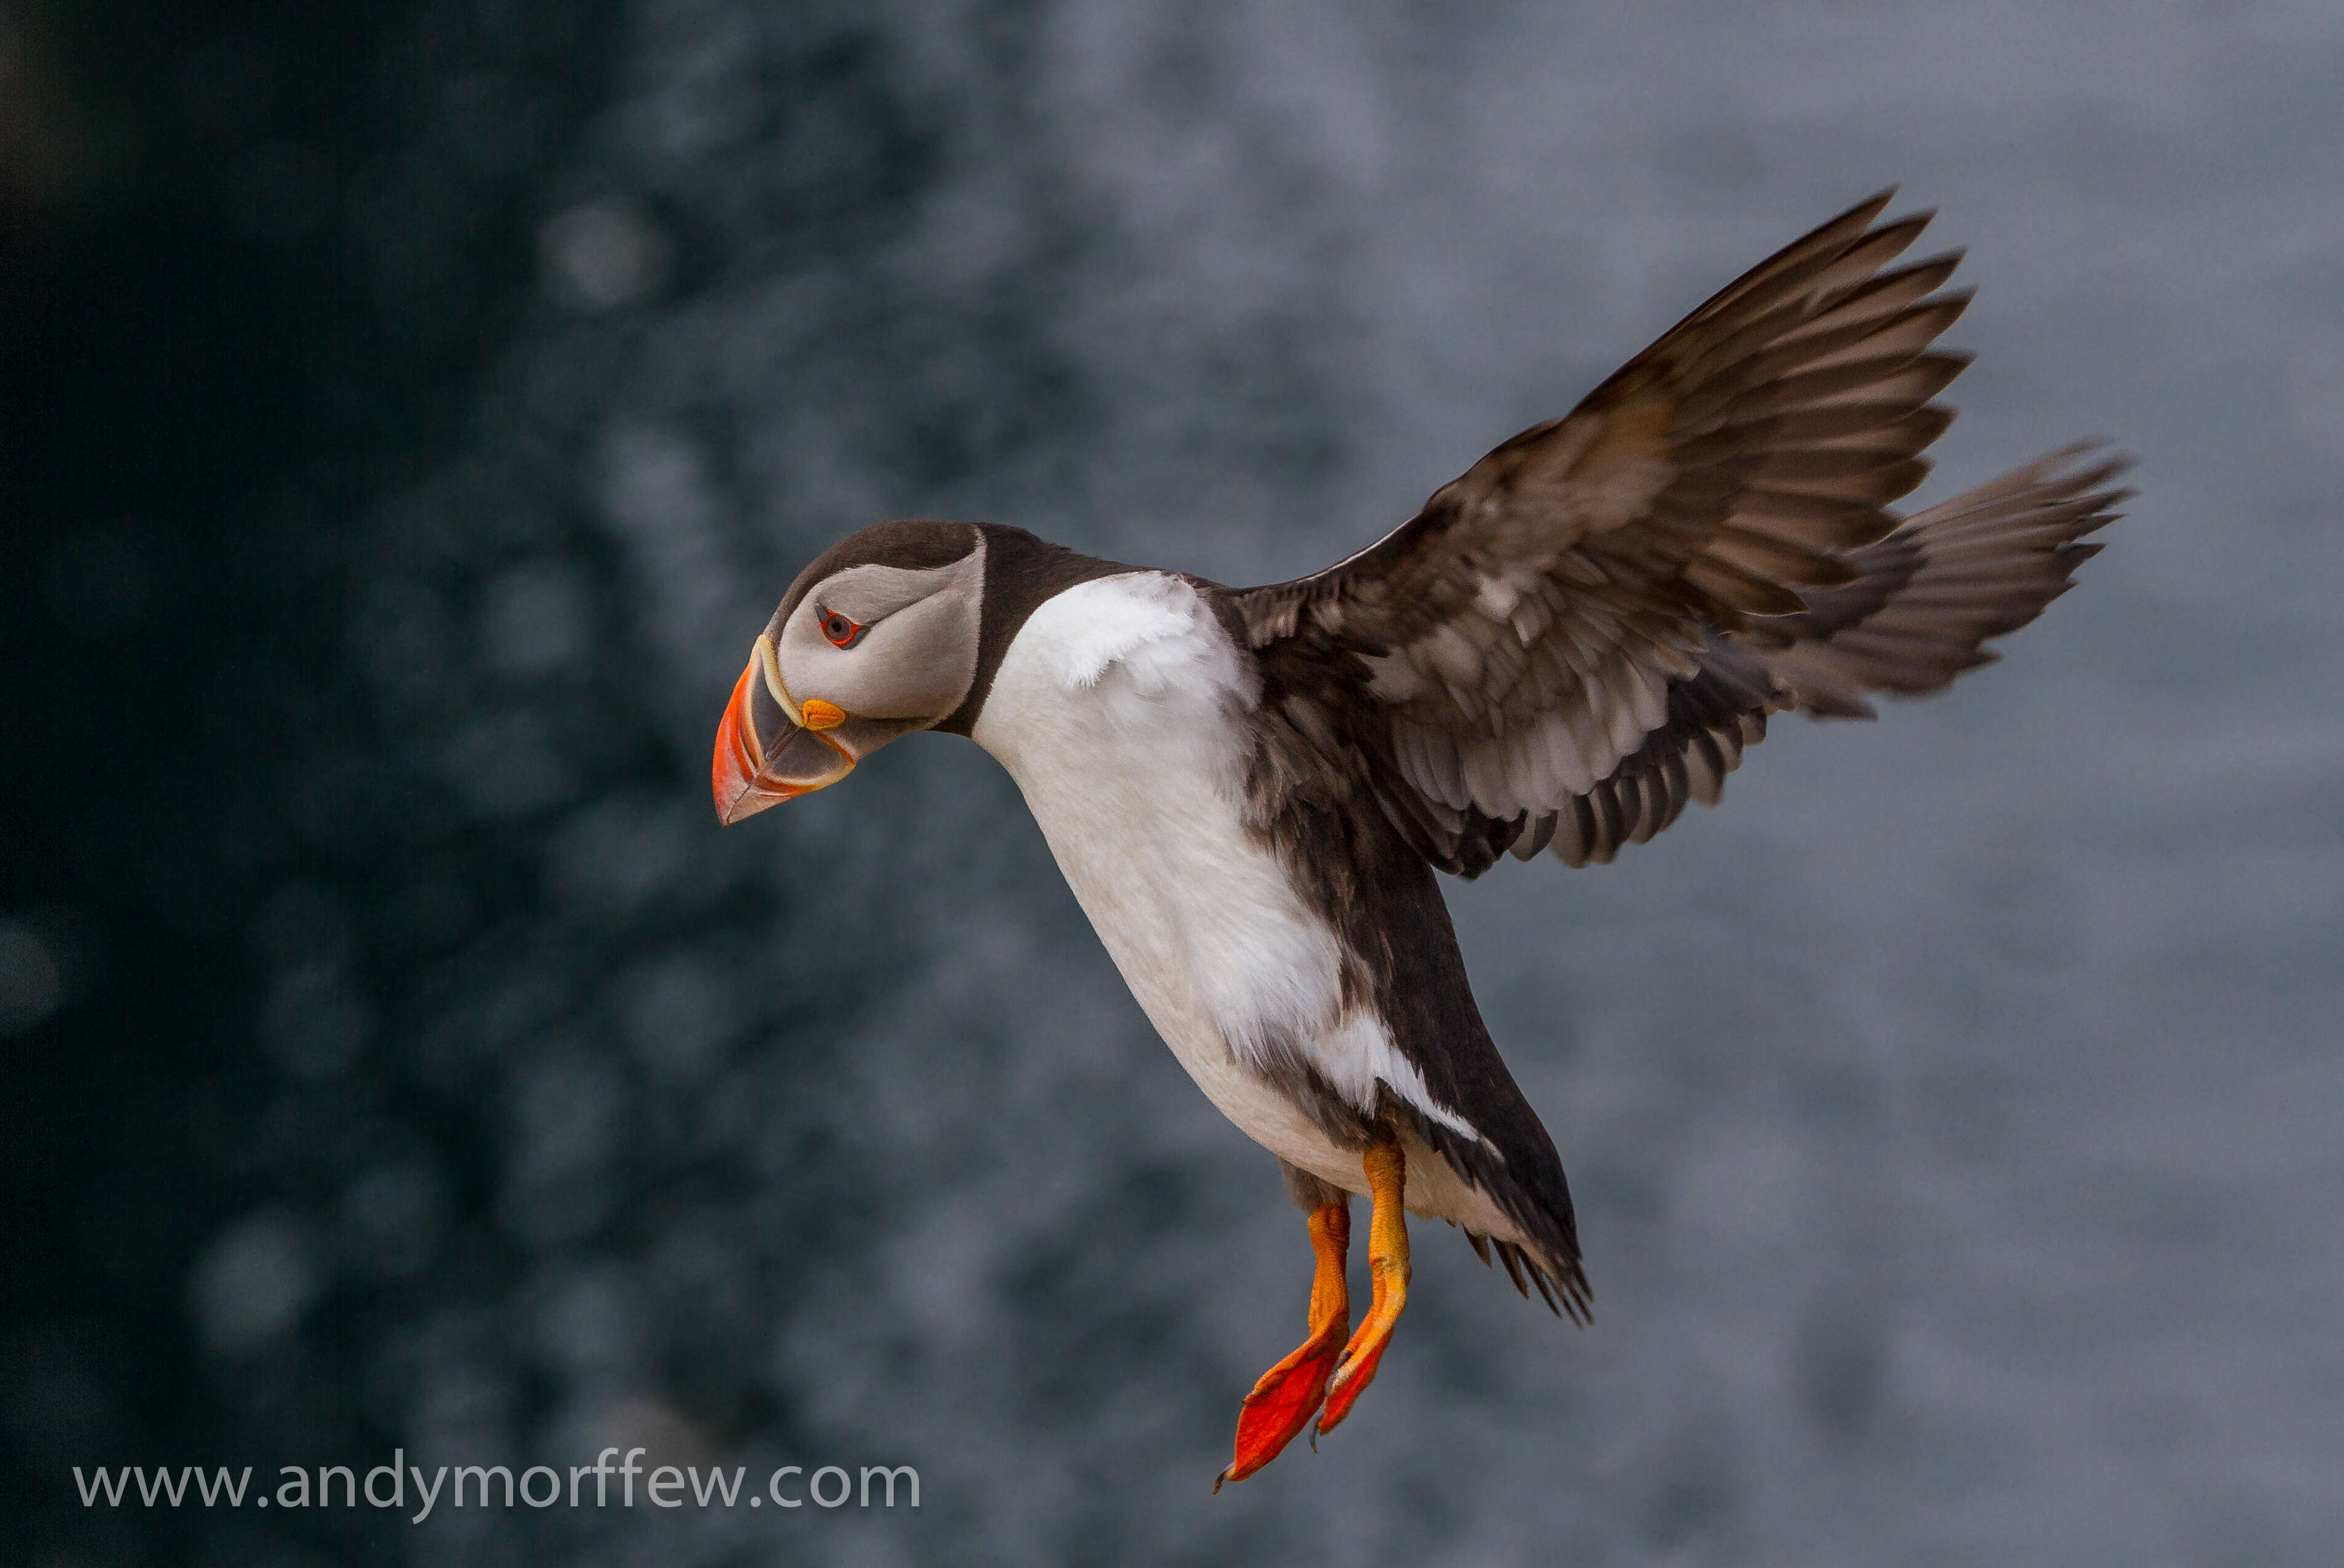 Image of Puffin